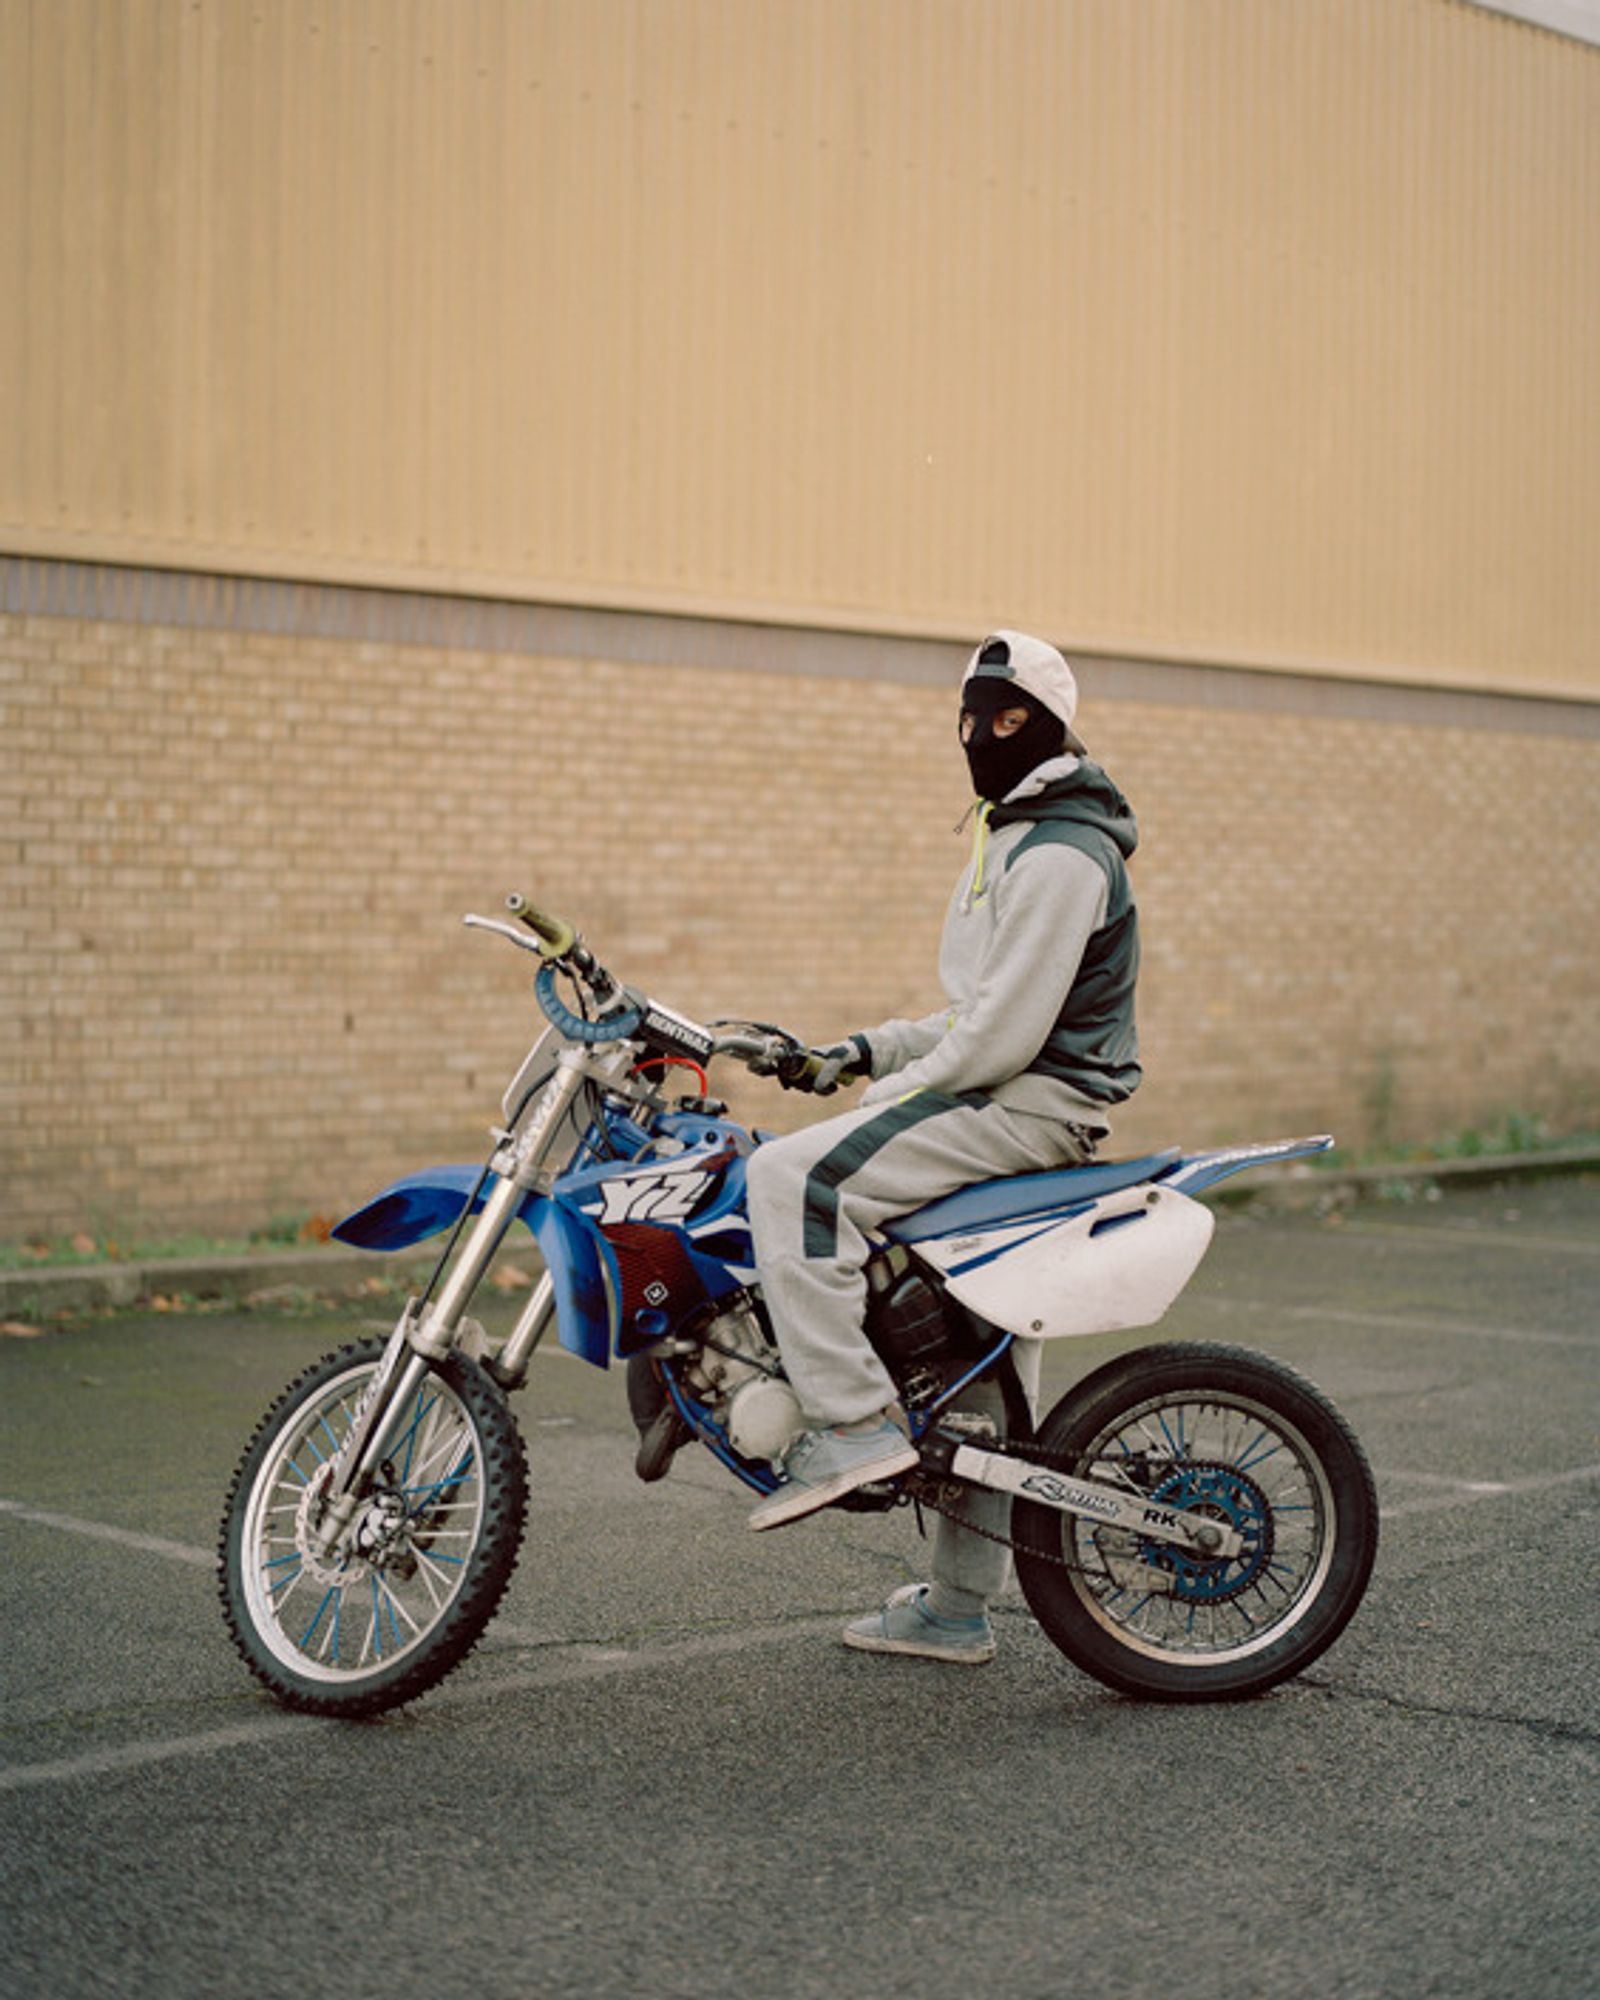 © Cian Oba-smith - Image from the BIkelife photography project